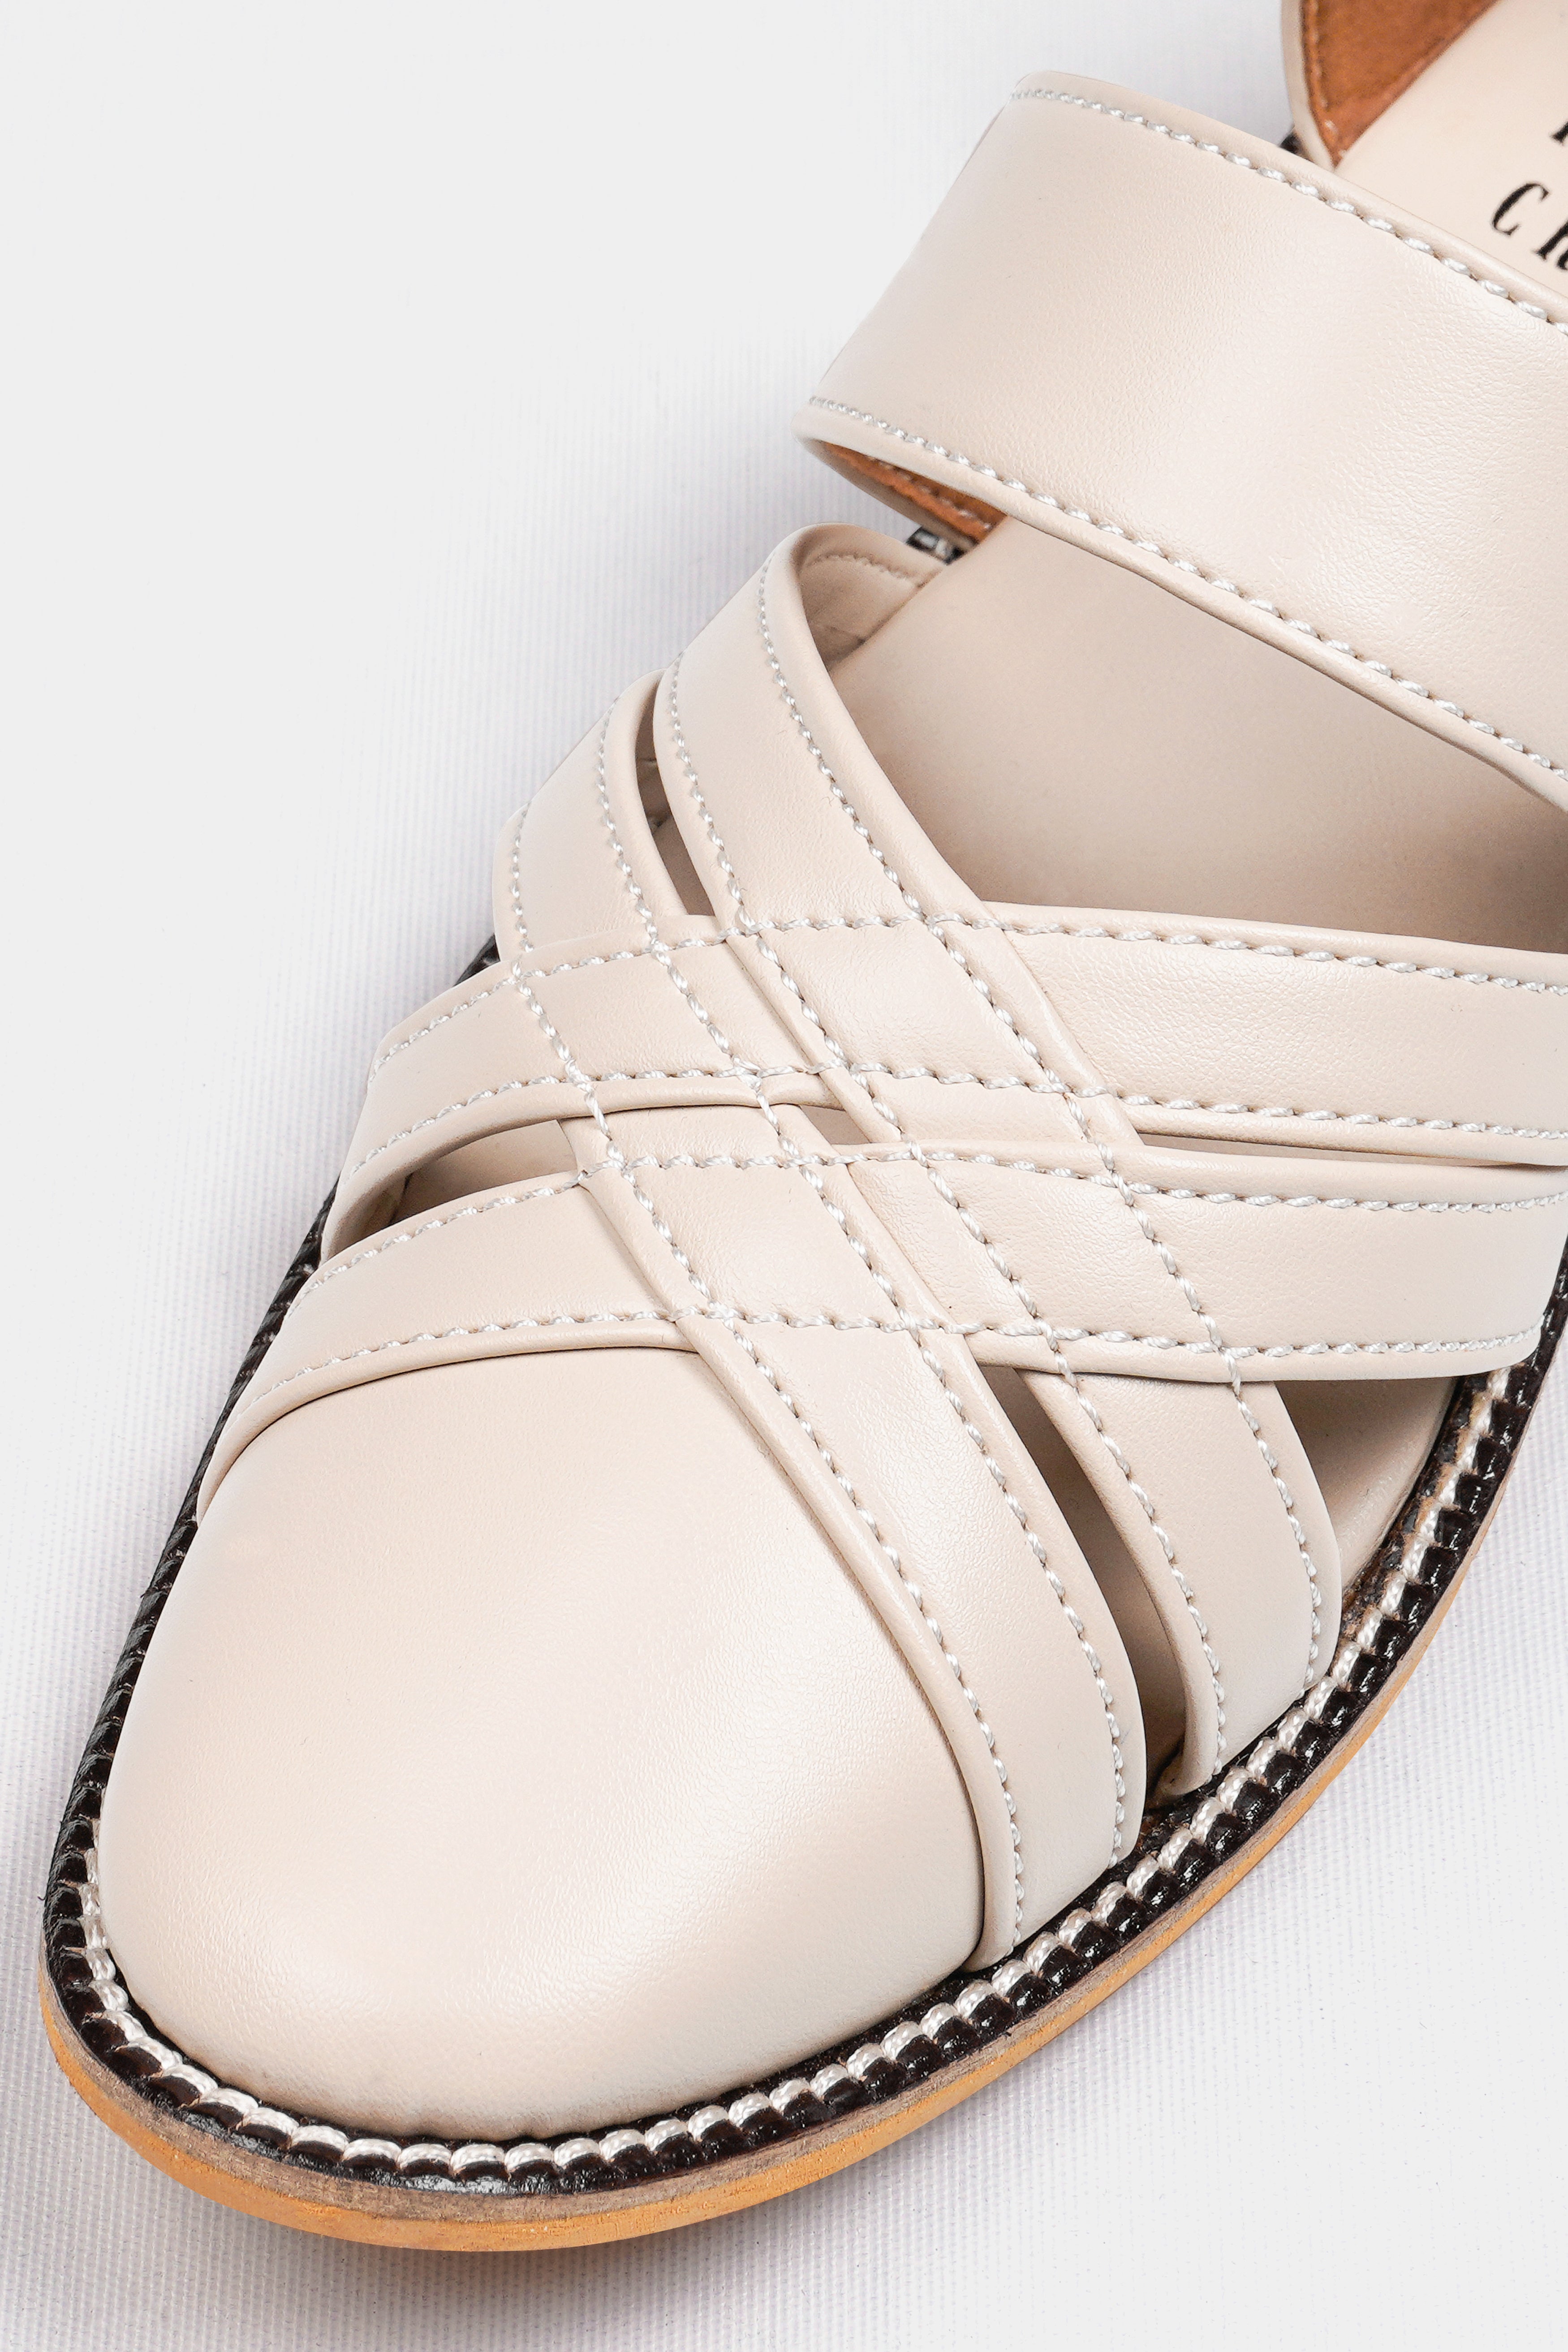 Beige Classic Criss Cross Vegan Leather Hand Stitched Pathanis Sandal FT135-6, FT135-7, FT135-8, FT135-9, FT135-10, FT135-11